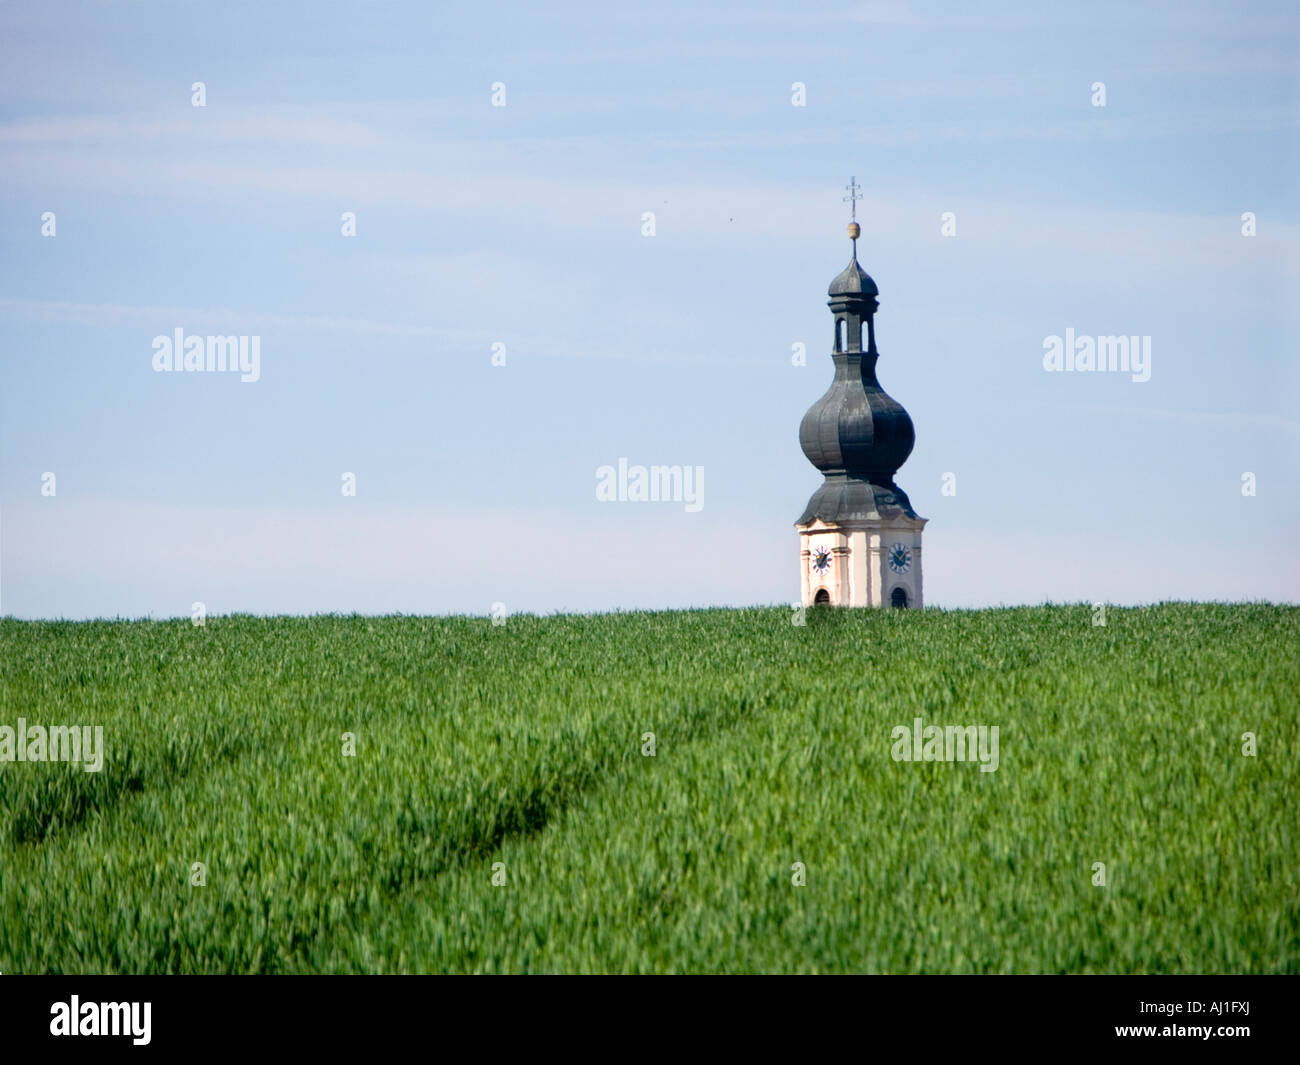 typical typically Bavaria Bavarian LOW BAVARIAN LANDSCAPE GERMANY field fields hill hills church tower steeple spire sky clouds Stock Photo